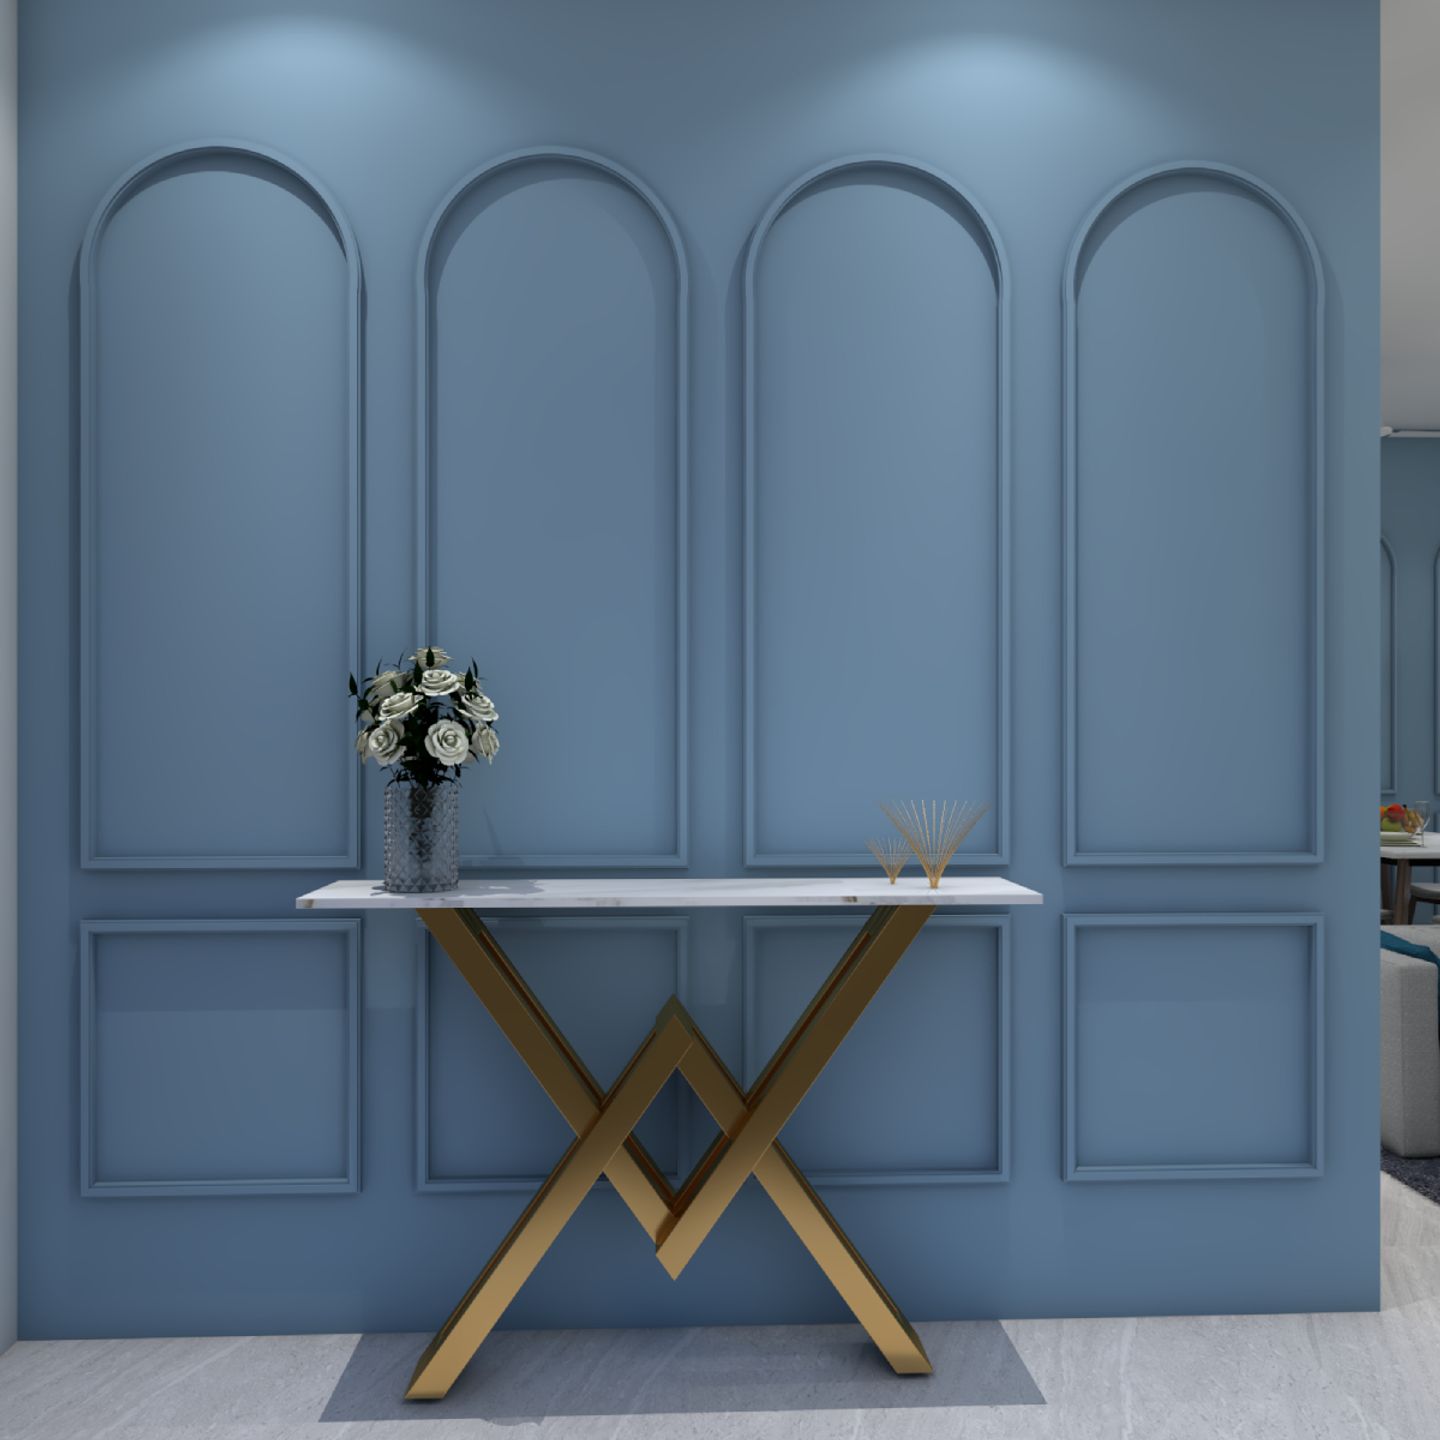 Compact Foyer Area Design With Blue Accent Wall Featuring Arch-Shaped Trims - Livspace